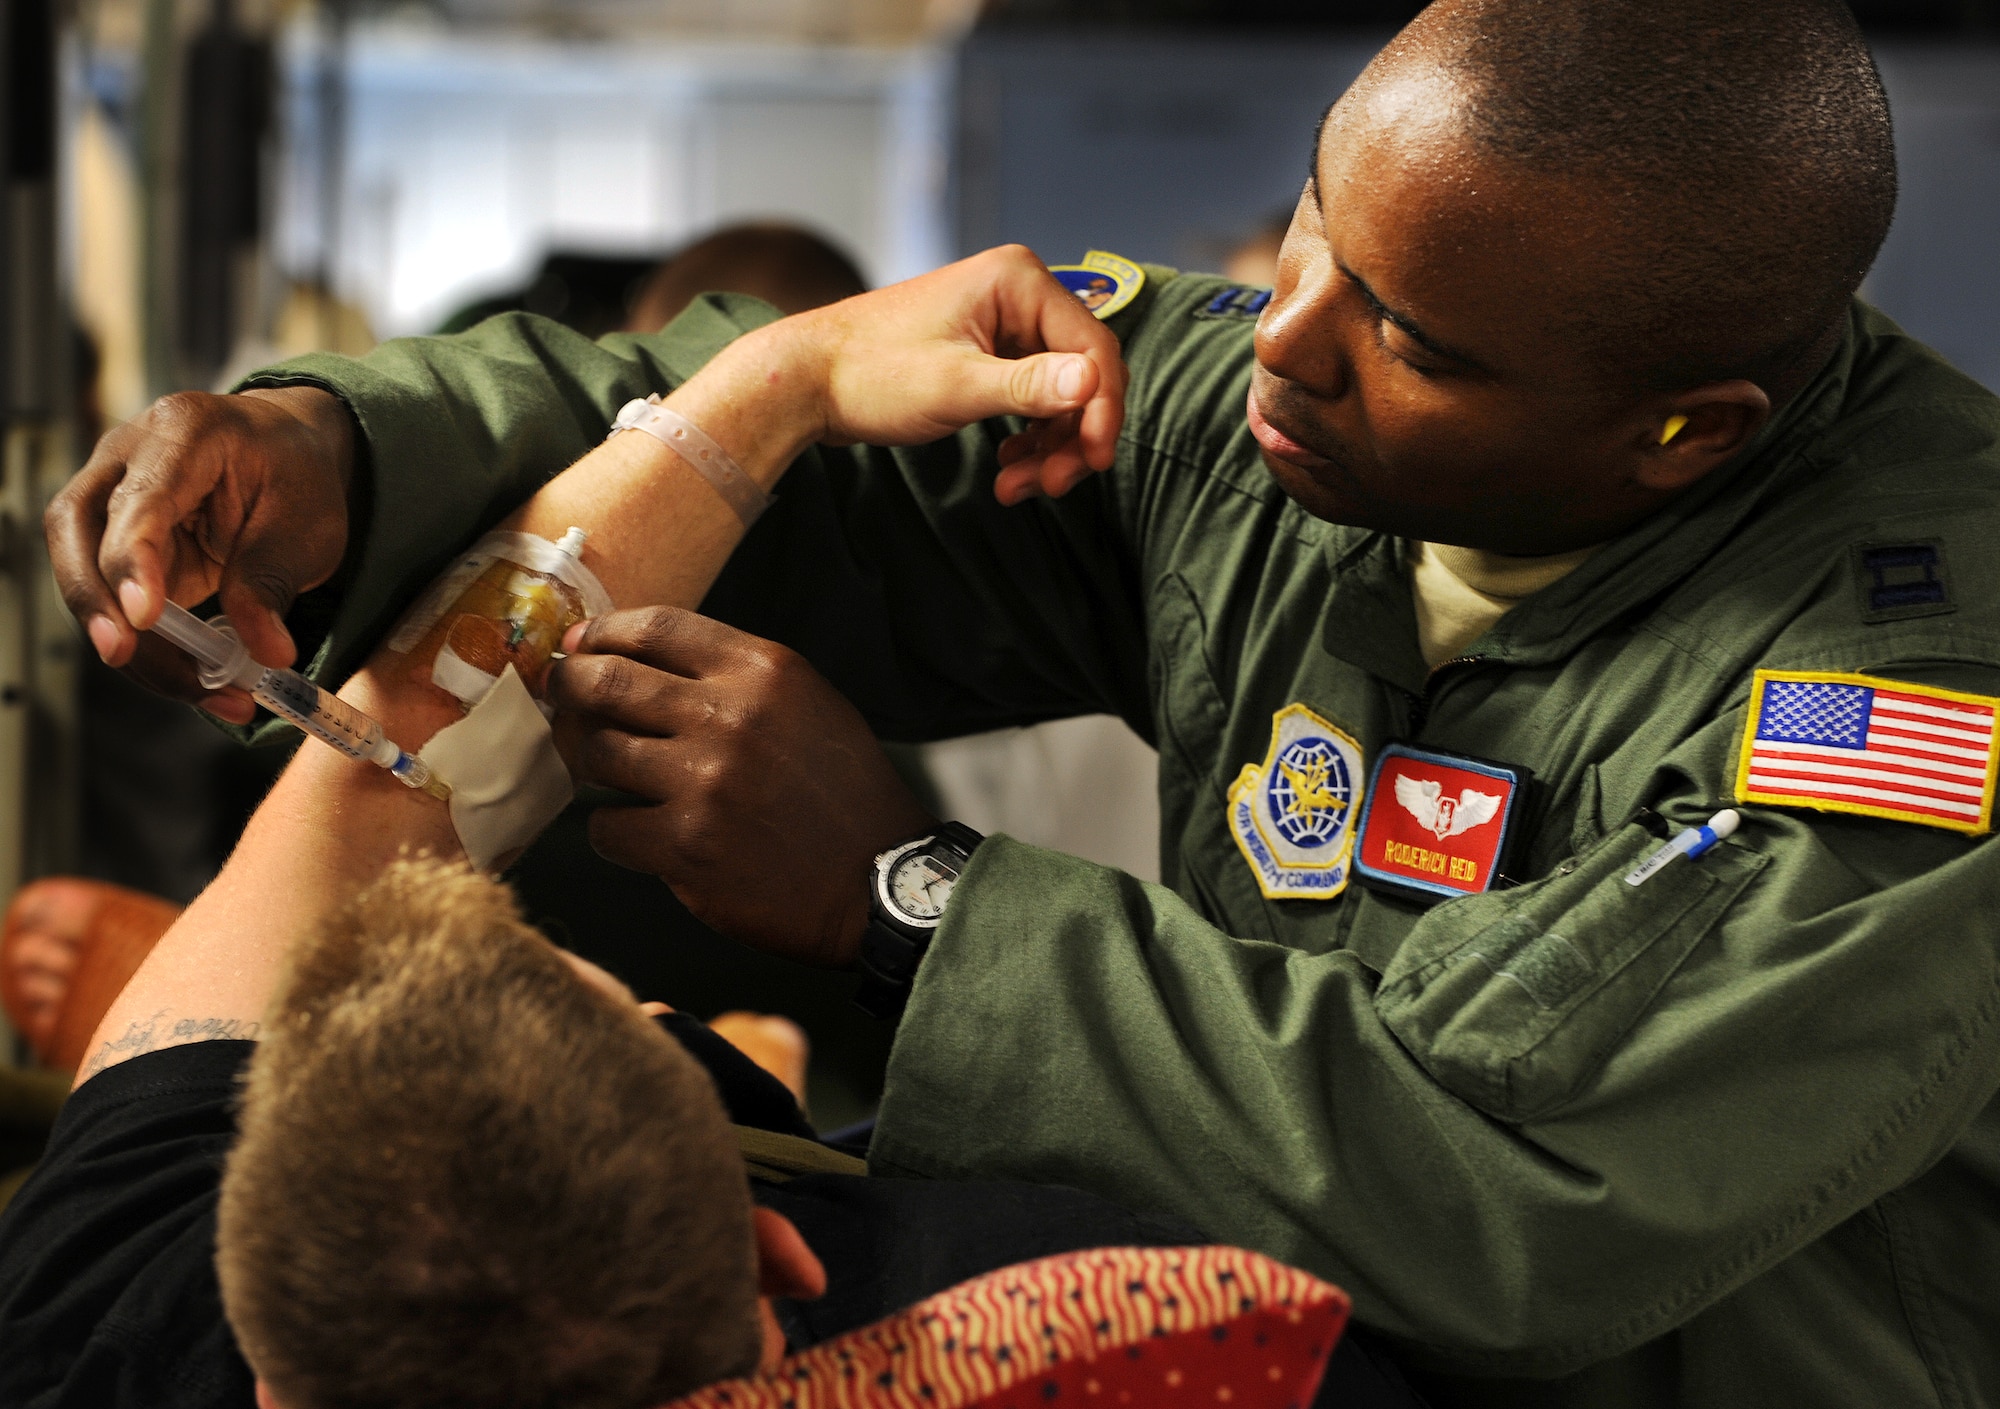 Captain Roderick Reid, a flight nurse from the 775th Expeditionary Aeromedical Evacuation Flight Travis Air Force Base, Calif., administers pain medication to a patient on board a C-17 Globemaster aircraft during a flight from Andrews Air Force Base, Md., on the weekly Integrated Continental United States Medical Operations Plan mission or ICMOP mission as it's known by it's acronym. The mission picks up war wounded and other patients at Andrews AFB and returns them to their homes throughout the United States.   (U.S. Air Force photo by Master Sgt. Rick Sforza)